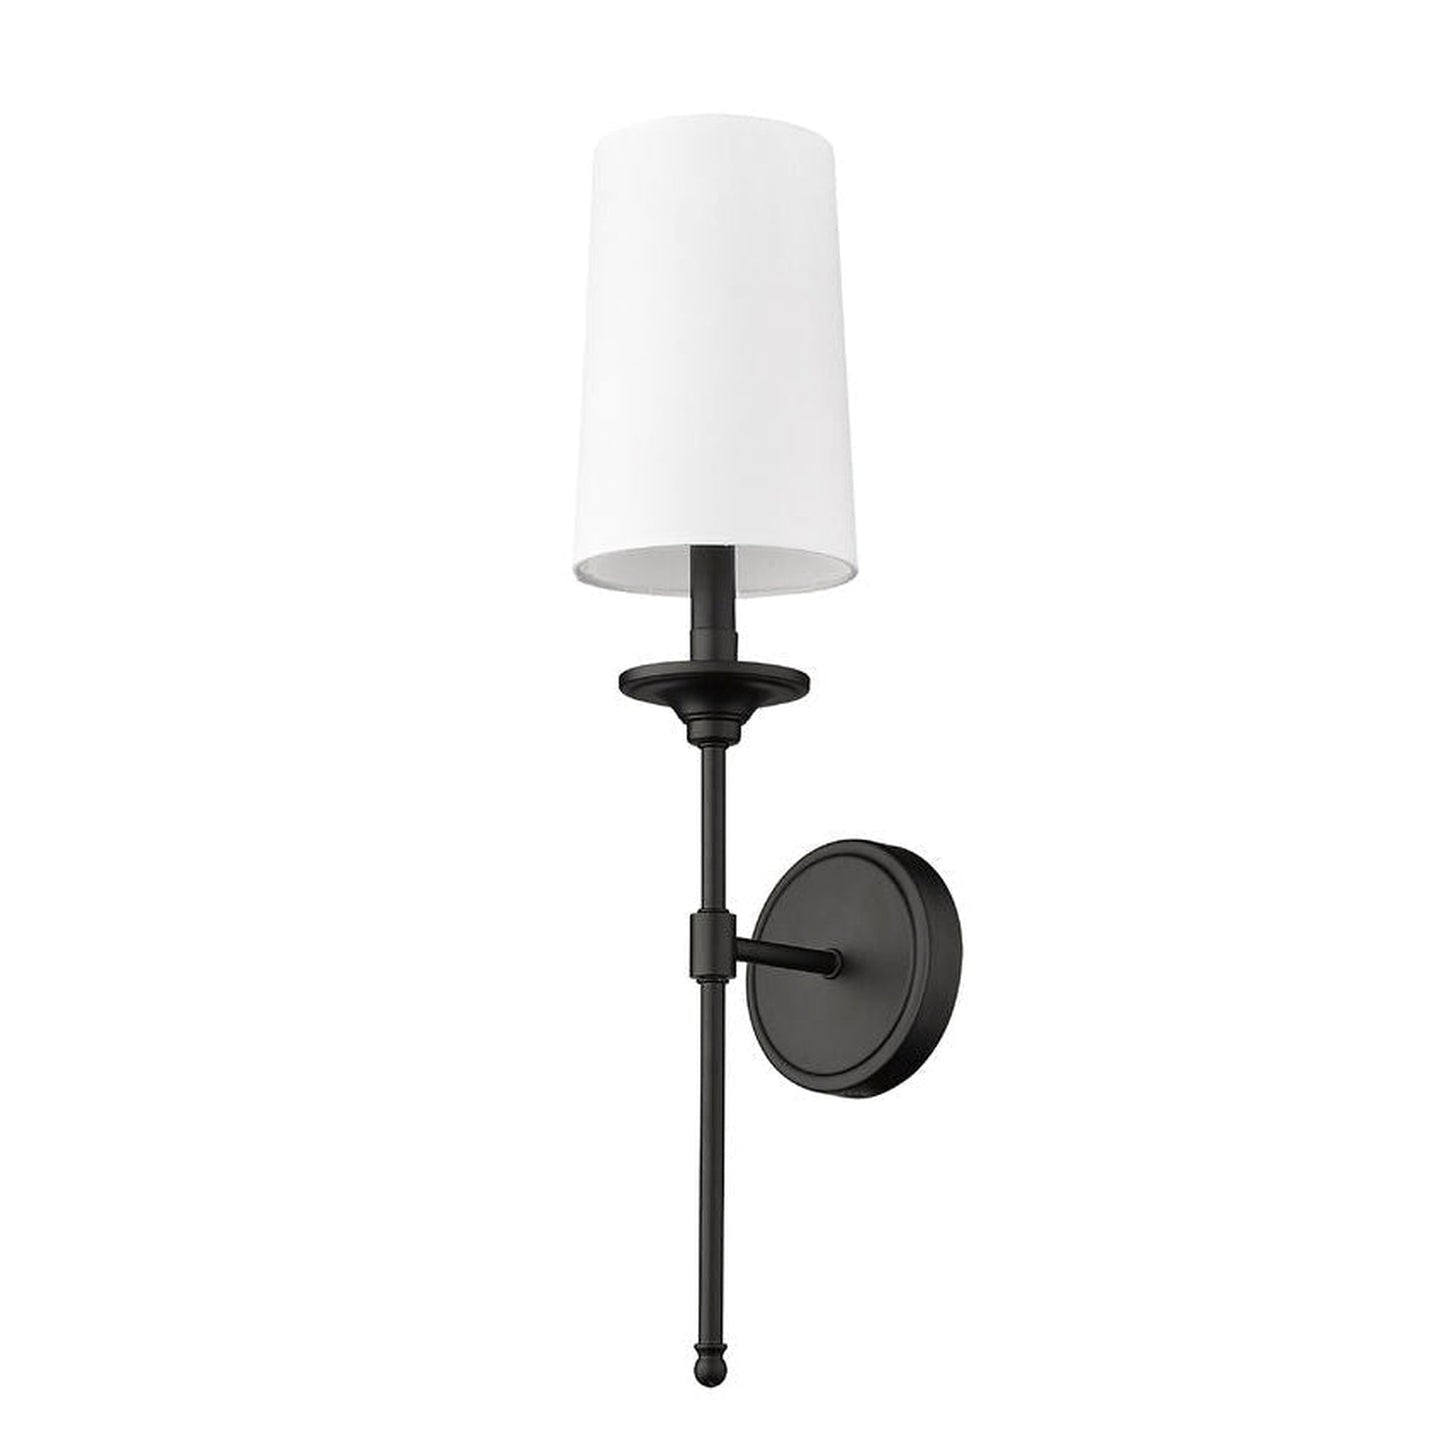 Z-Lite Emily 6" 1-Light Matte Black Wall Sconce With Off-White Cloth Shade